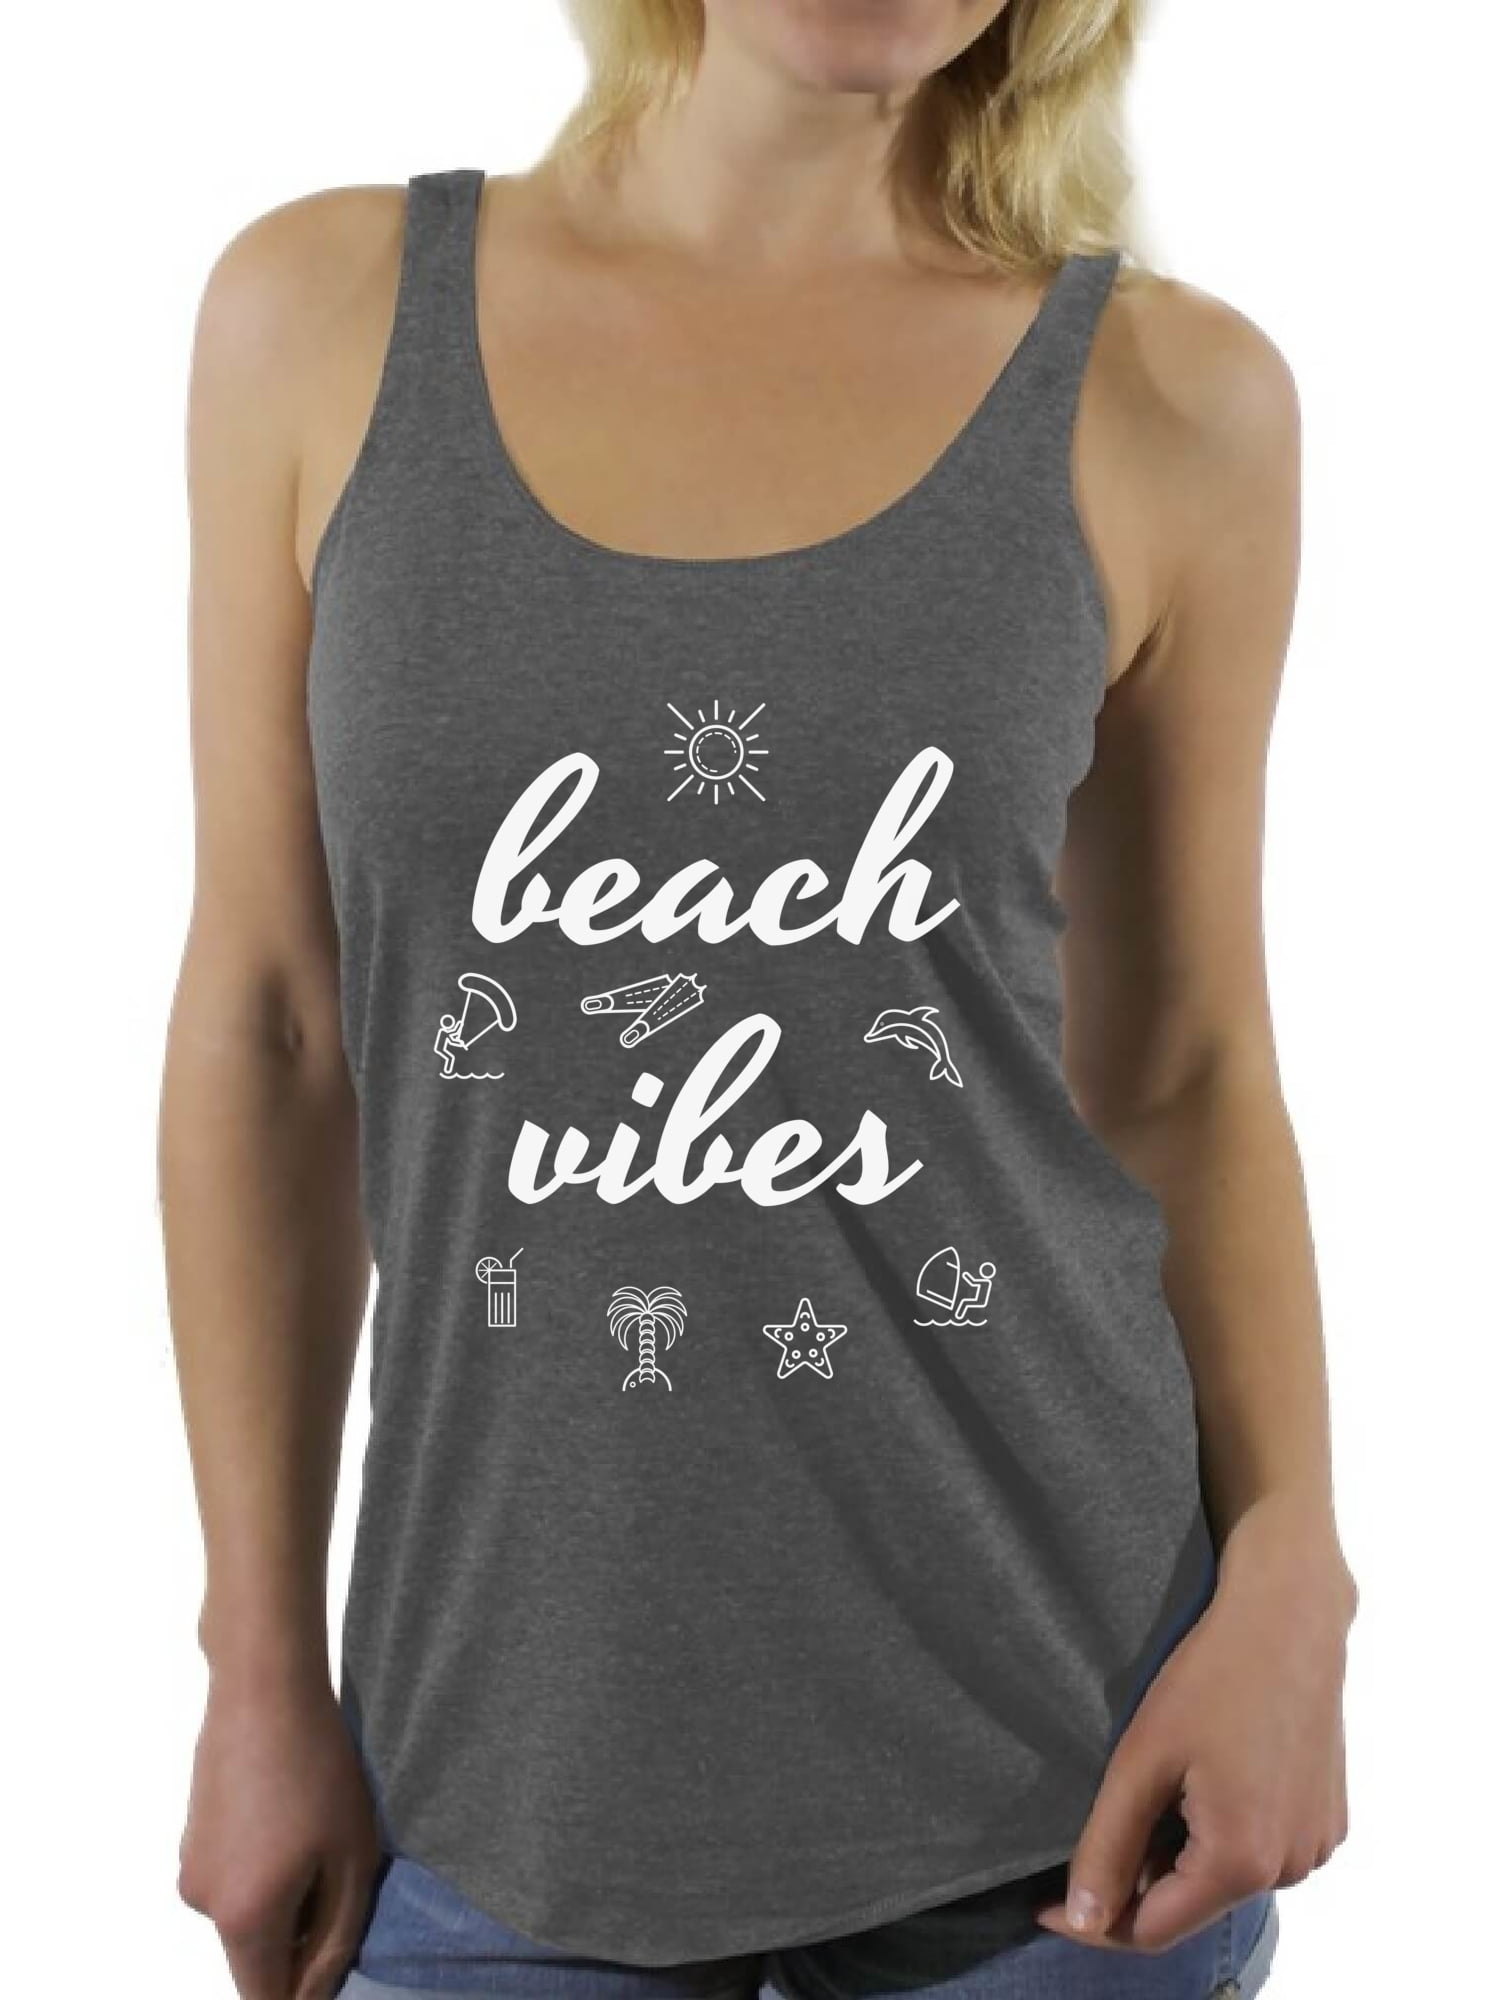 Women's Clothing Racerback Tank Beach Bound with Surfboards Tank Top for Beachgoers and Summertime Fun Lovers